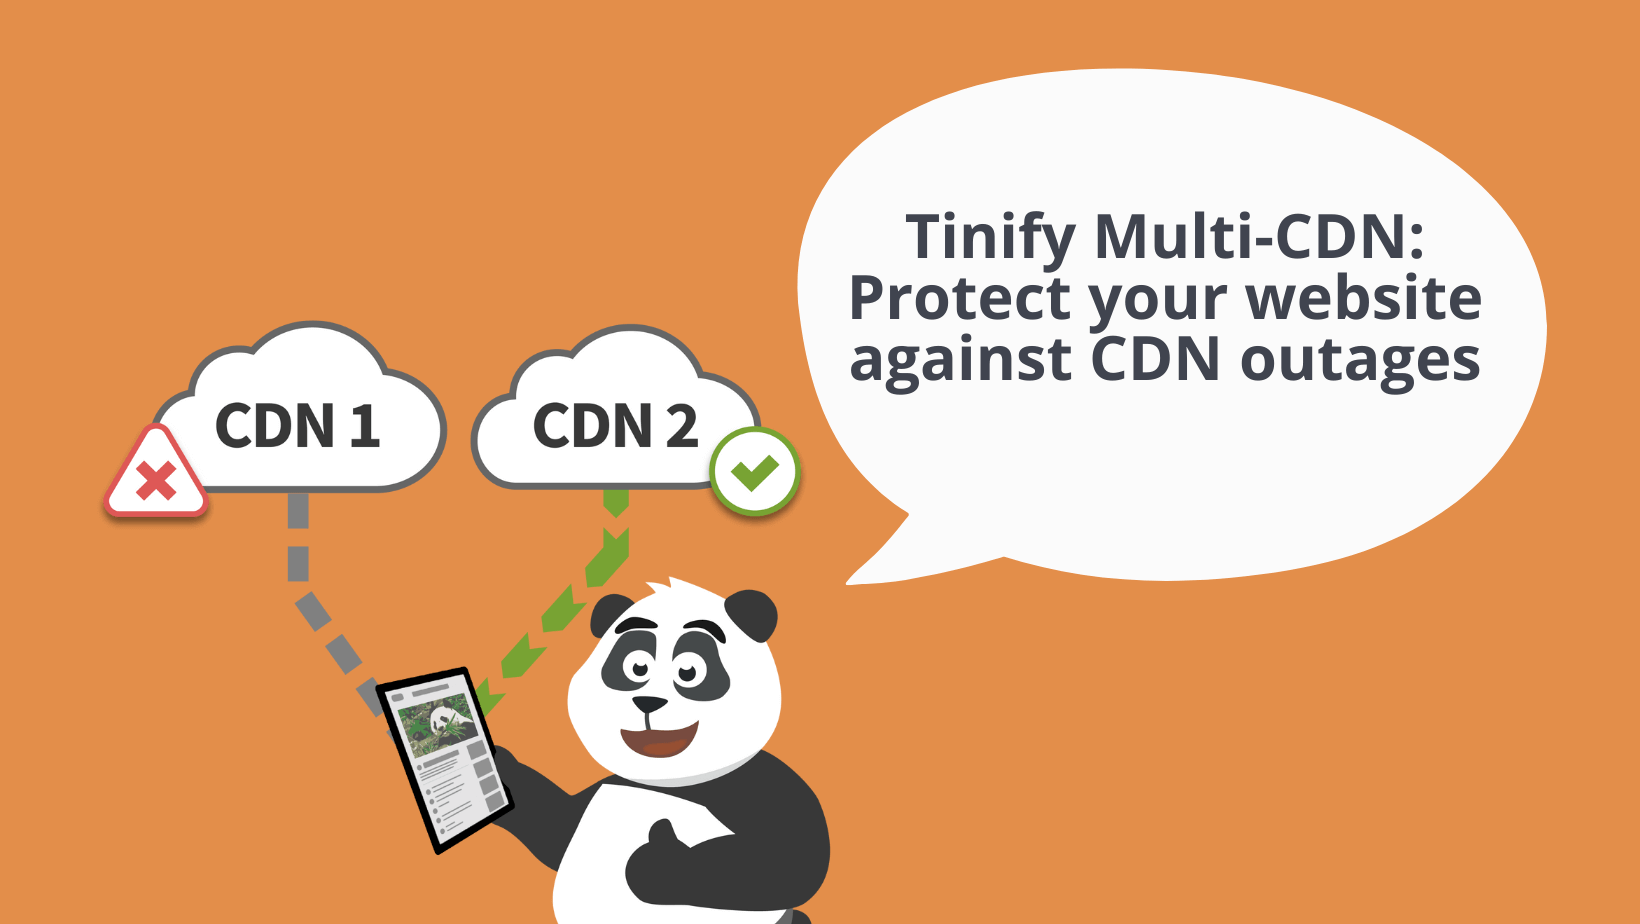 Tinify Multi-CDN: Protect your website against CDN outages